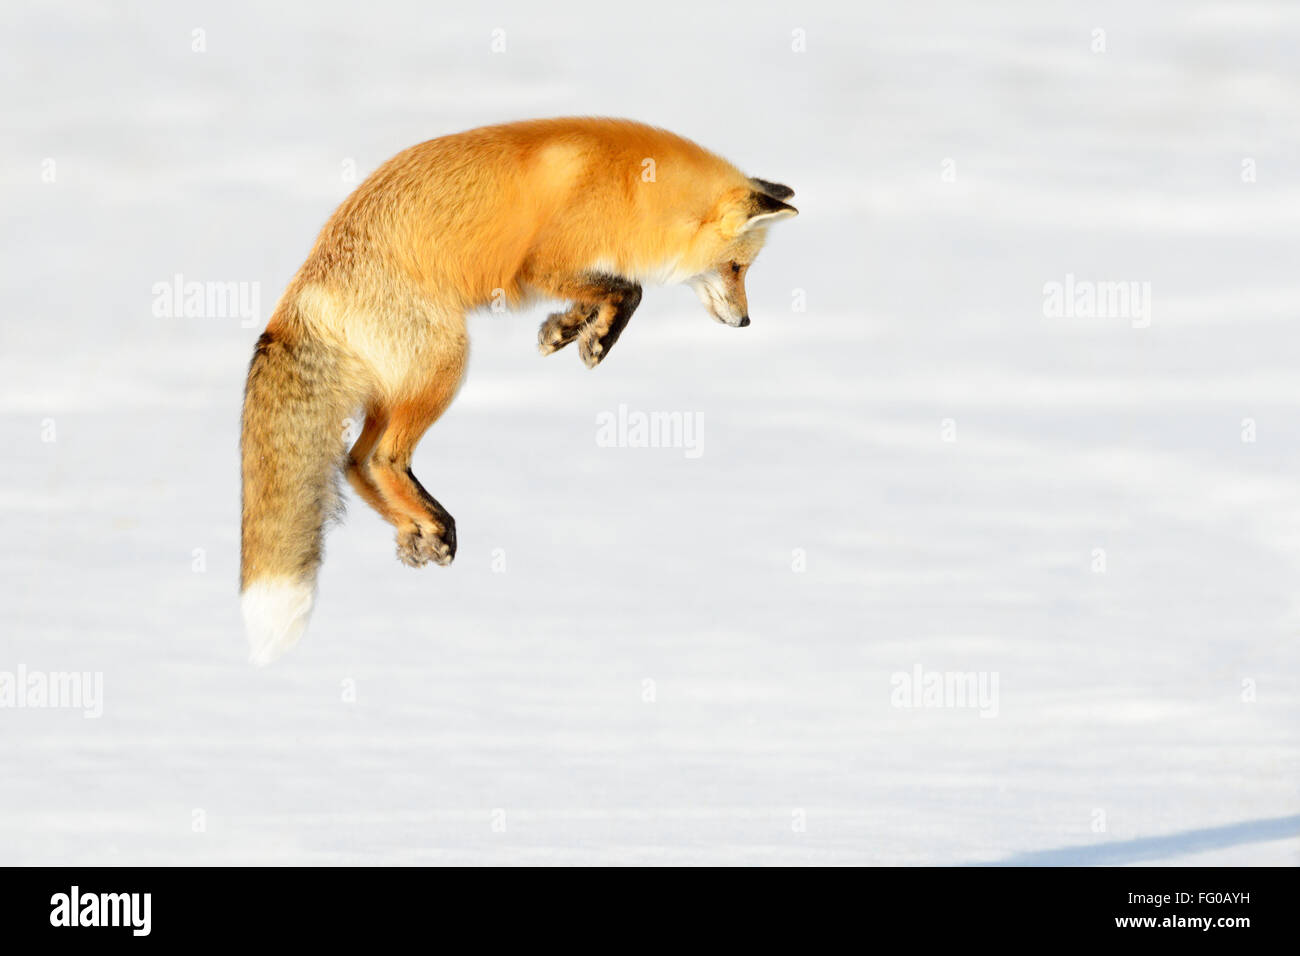 American Red Fox (Vulpes vulpes fulva) adult, hunting, jumping on prey in snow, Yellowstone national park, Wyoming, USA. Stock Photo